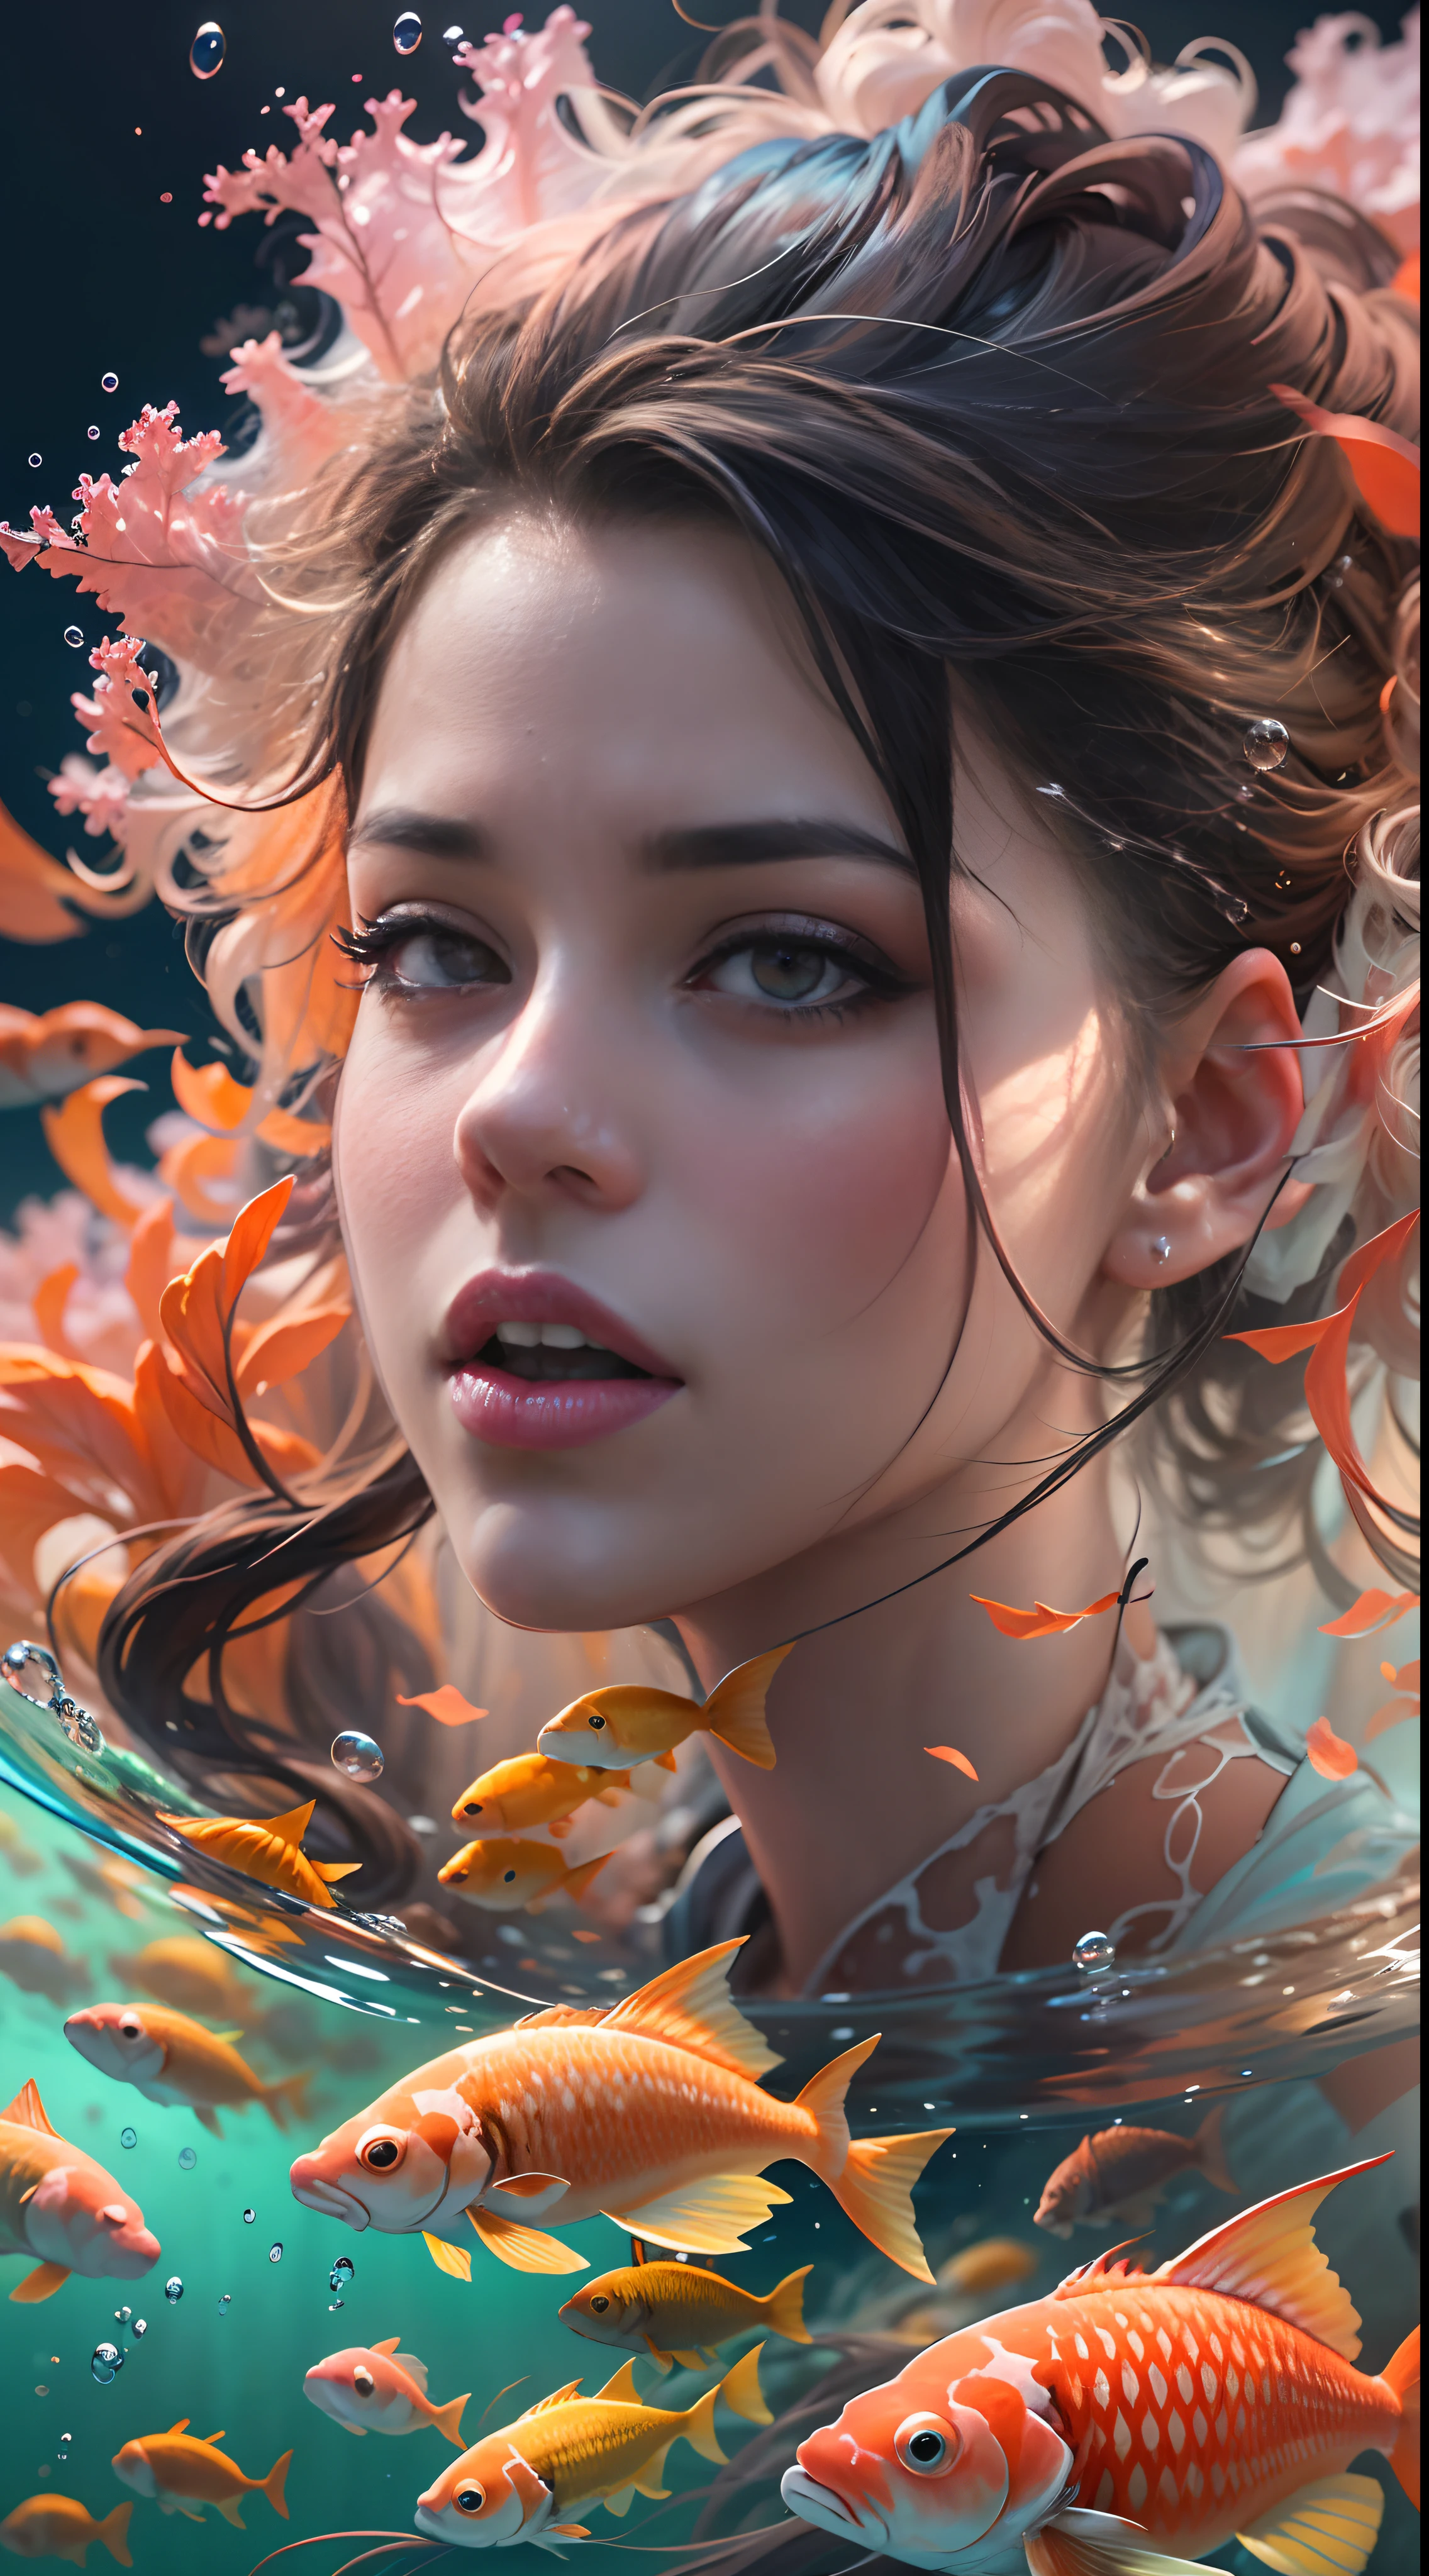 modelshoot style, (extremely detailed CG unit 8k wallpaper), A chaotic storm of intricate liquid smoke in the head, Stylized abstract portrait of pretty, skin wet,Koi，Koi bonito | |，Bandas Koi,carp，Strangely shaped corals，Ocean floor，Beautiful coral reef in the background，rockery,Marine life，colorful coral reef,Decorate with coral reefs,author：Petros Afshar, ross tran, Tom Baleia, peter mohrbacher, art germ, vidro quebrado, ((bubbly underwater scenery)) The octane rendering of radiant light is highly detailed, inspired by Yanjun Cheng, beautiful digital art, Guviz-style artwork, Highly detailed 8K digital art, Beautiful digital illustration, detailed digital art cute, stunning digital illustration, a beautiful artwork illustration, exquisite digital illustration,Detailed 8K digital art,